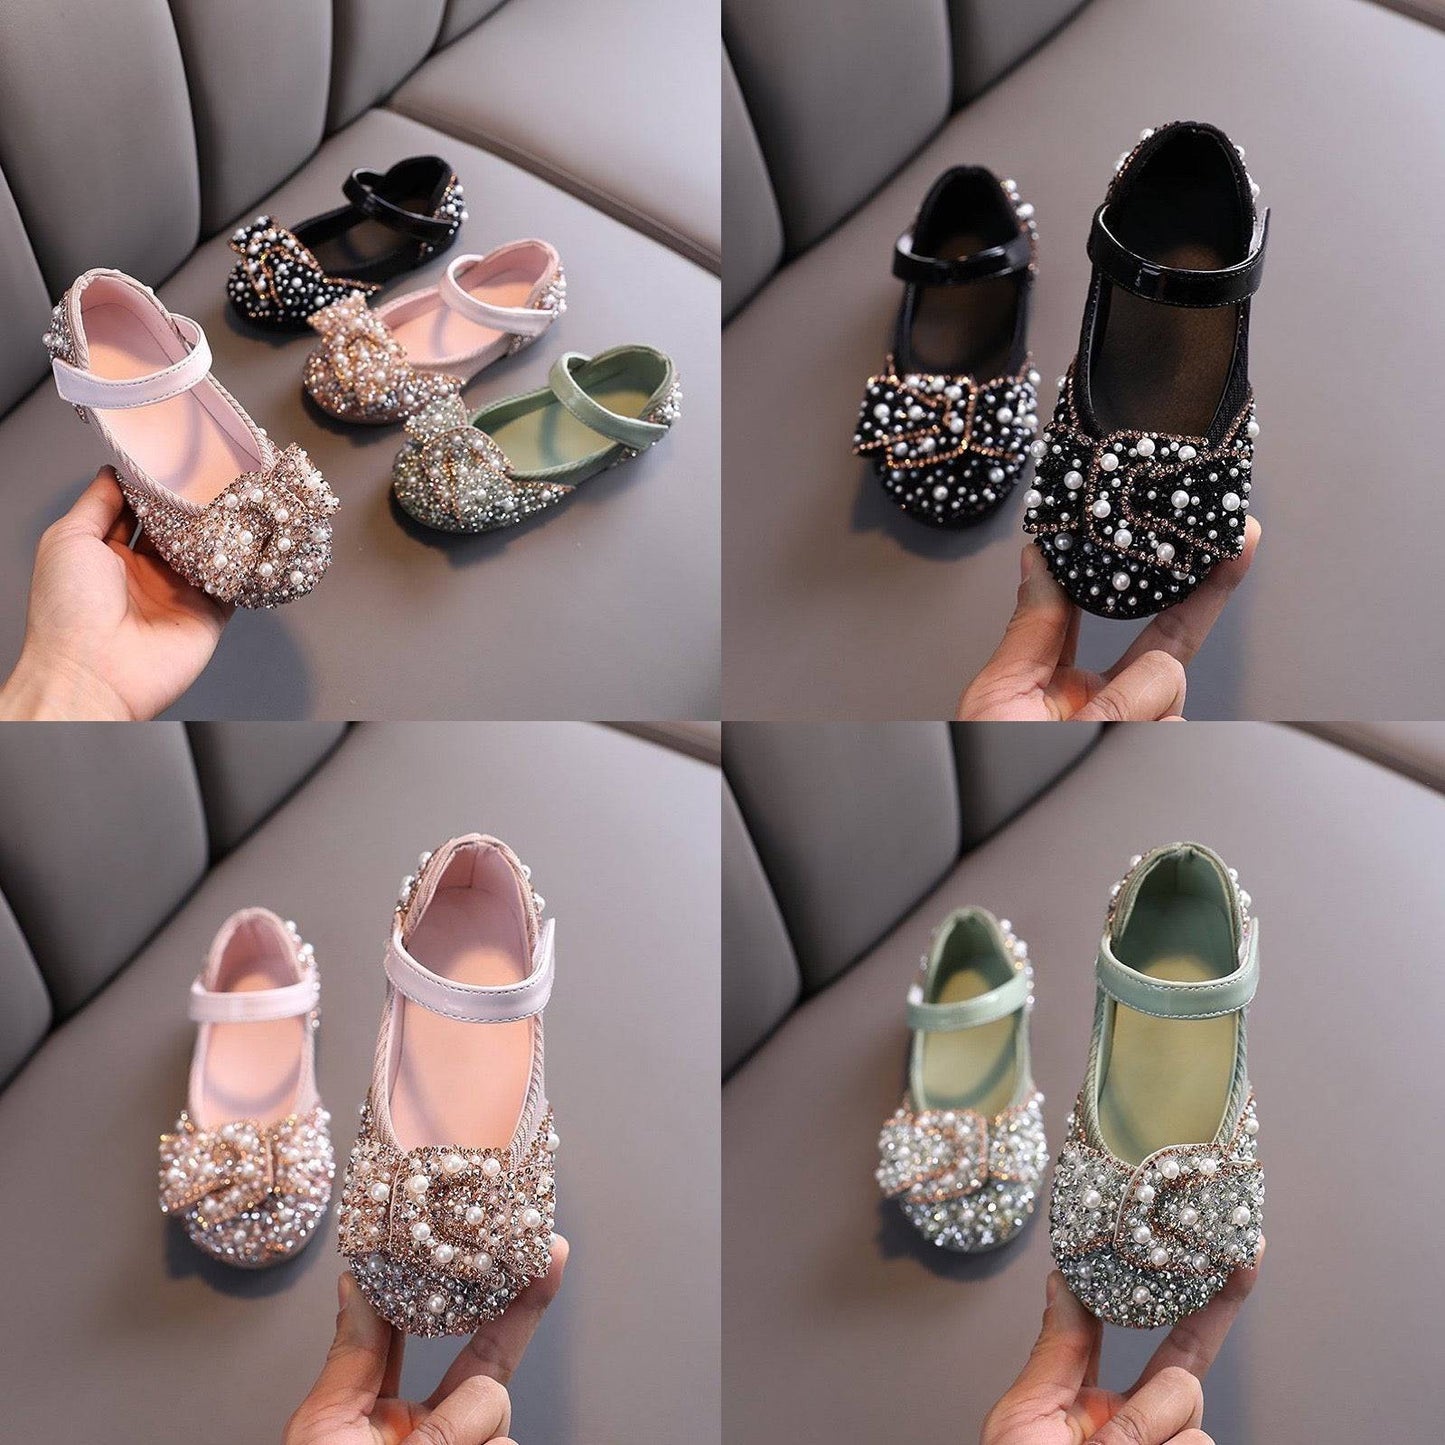 little girl toddler shoes for parties and birthday and wedding with gold pearl leather حذاء اطفال للحفلات 